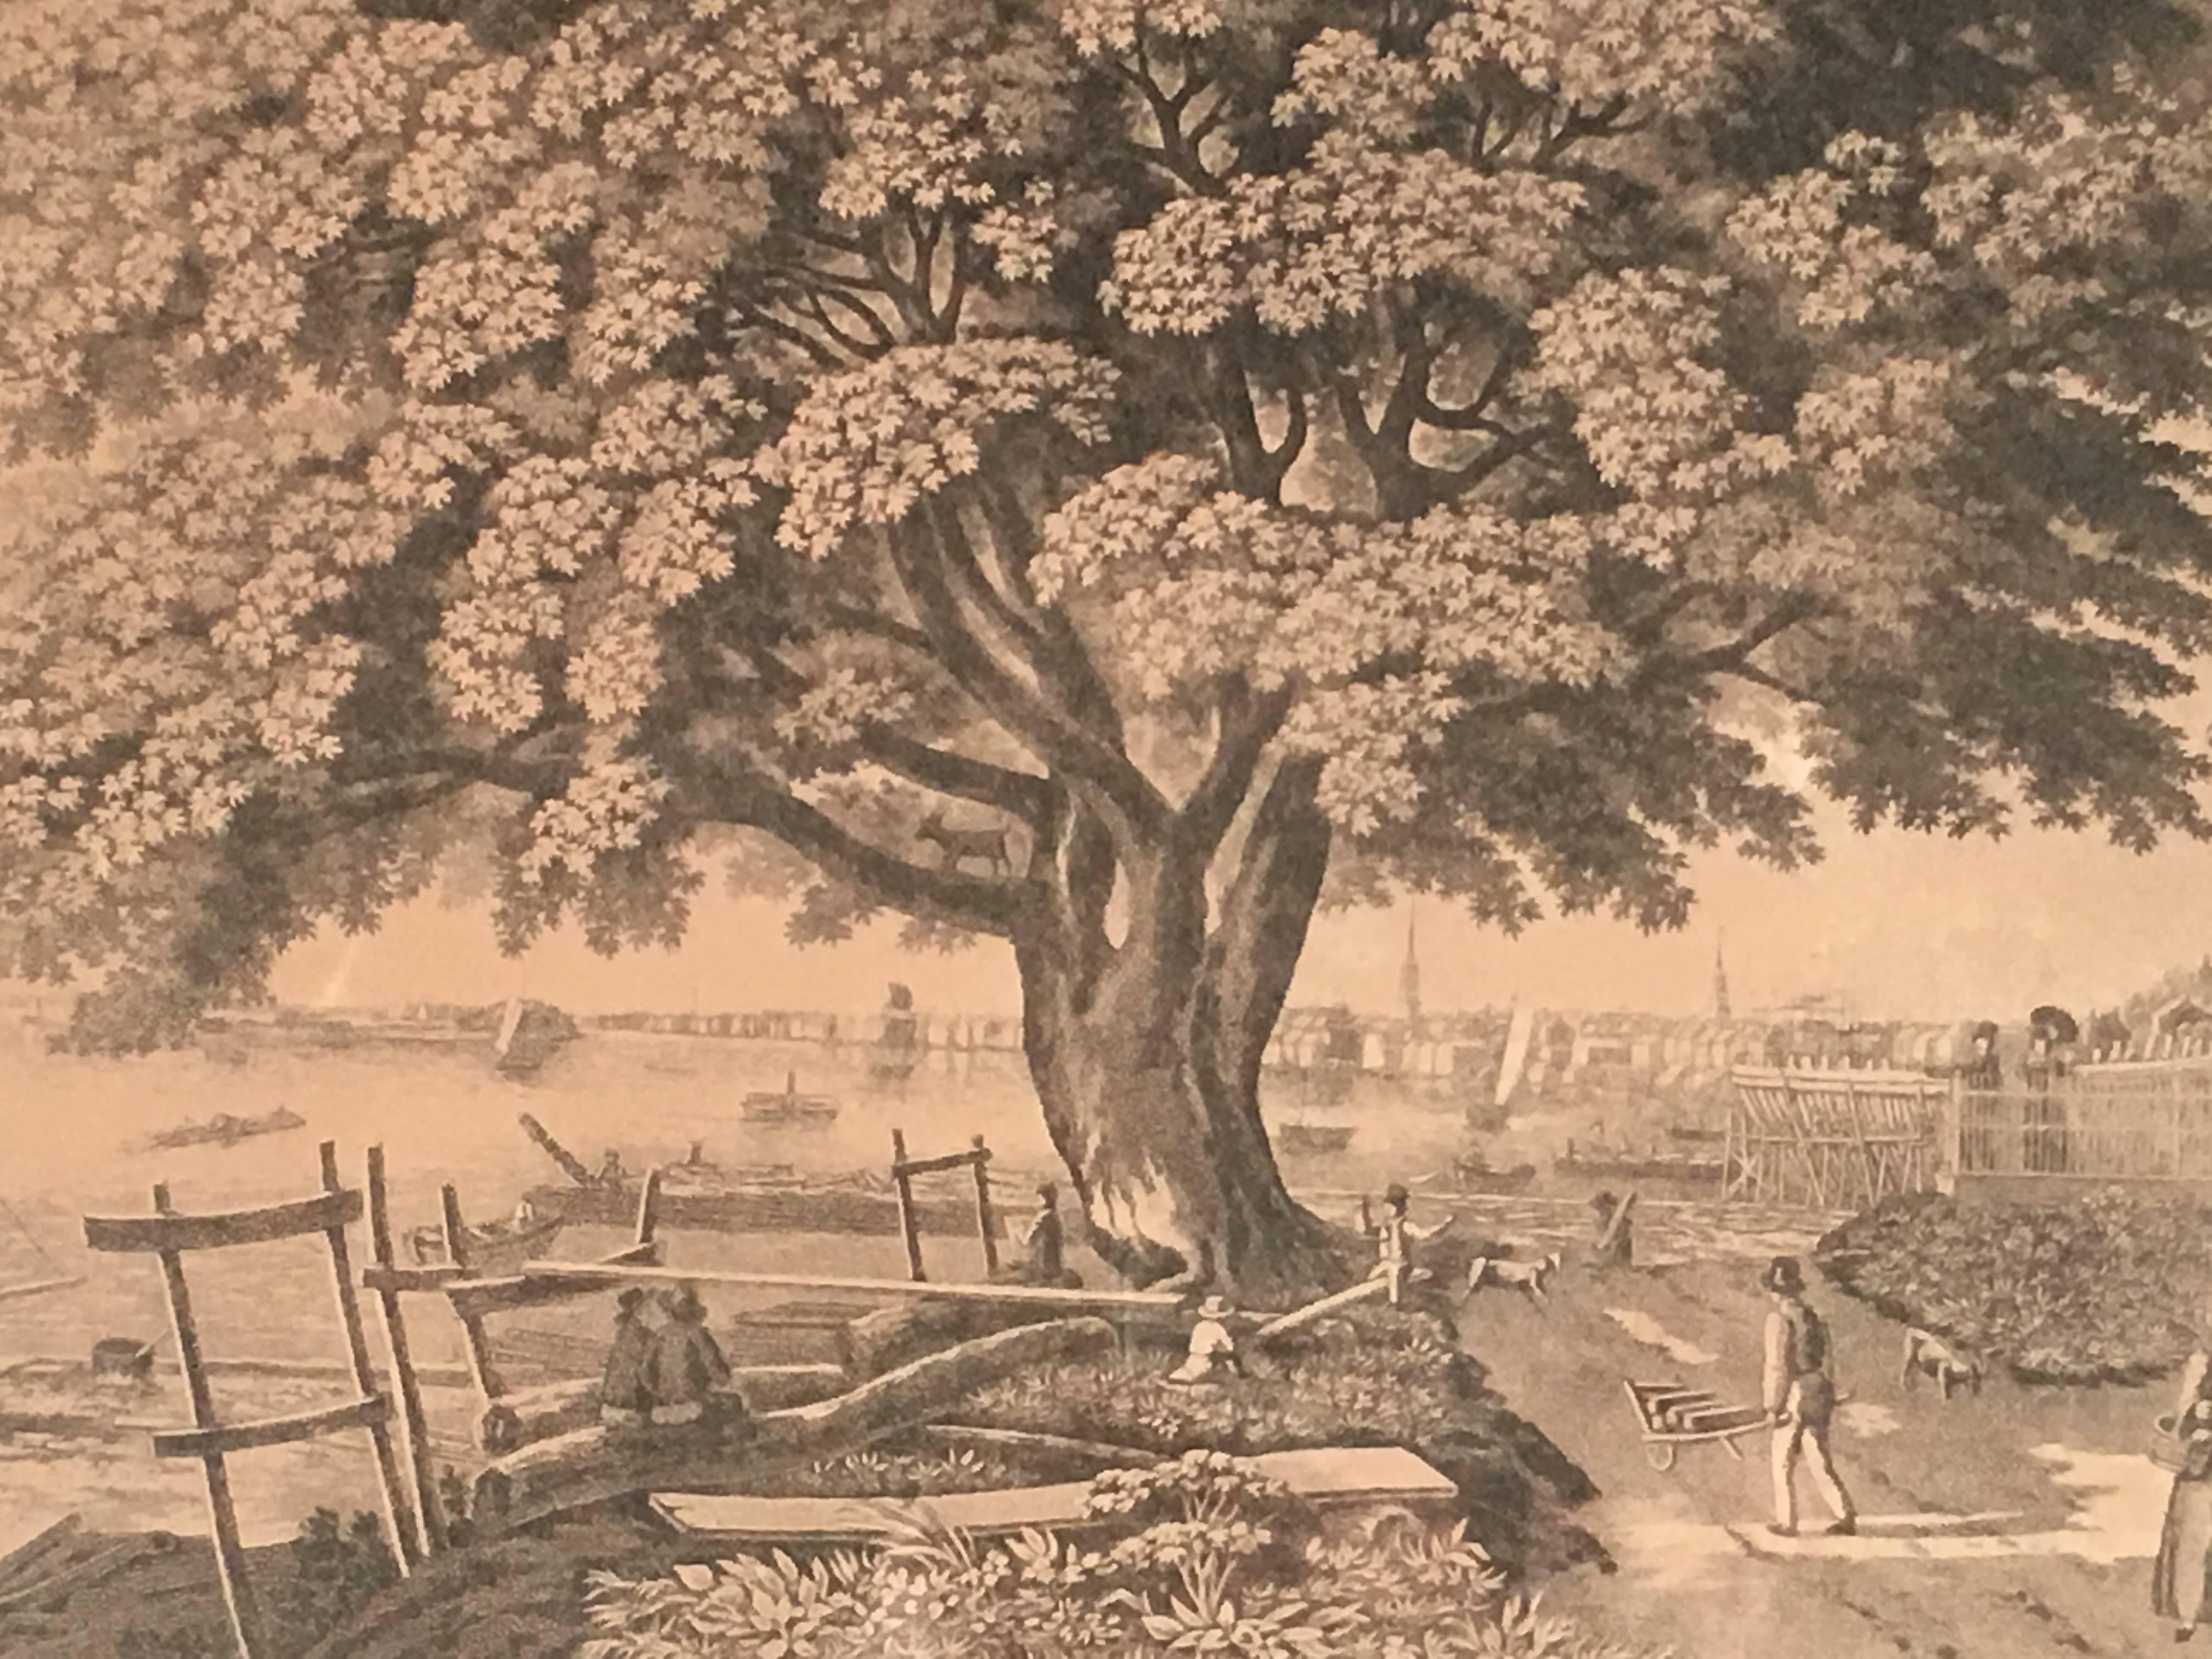 A mid-19th century print entitled The Great Elm Tree of Shackamaxon Now Kensington (Pennsylvania), under which William Penn concluded his treaty with the Indians in 1682.
This scene was both painted and engraved by George Lehman, who based his